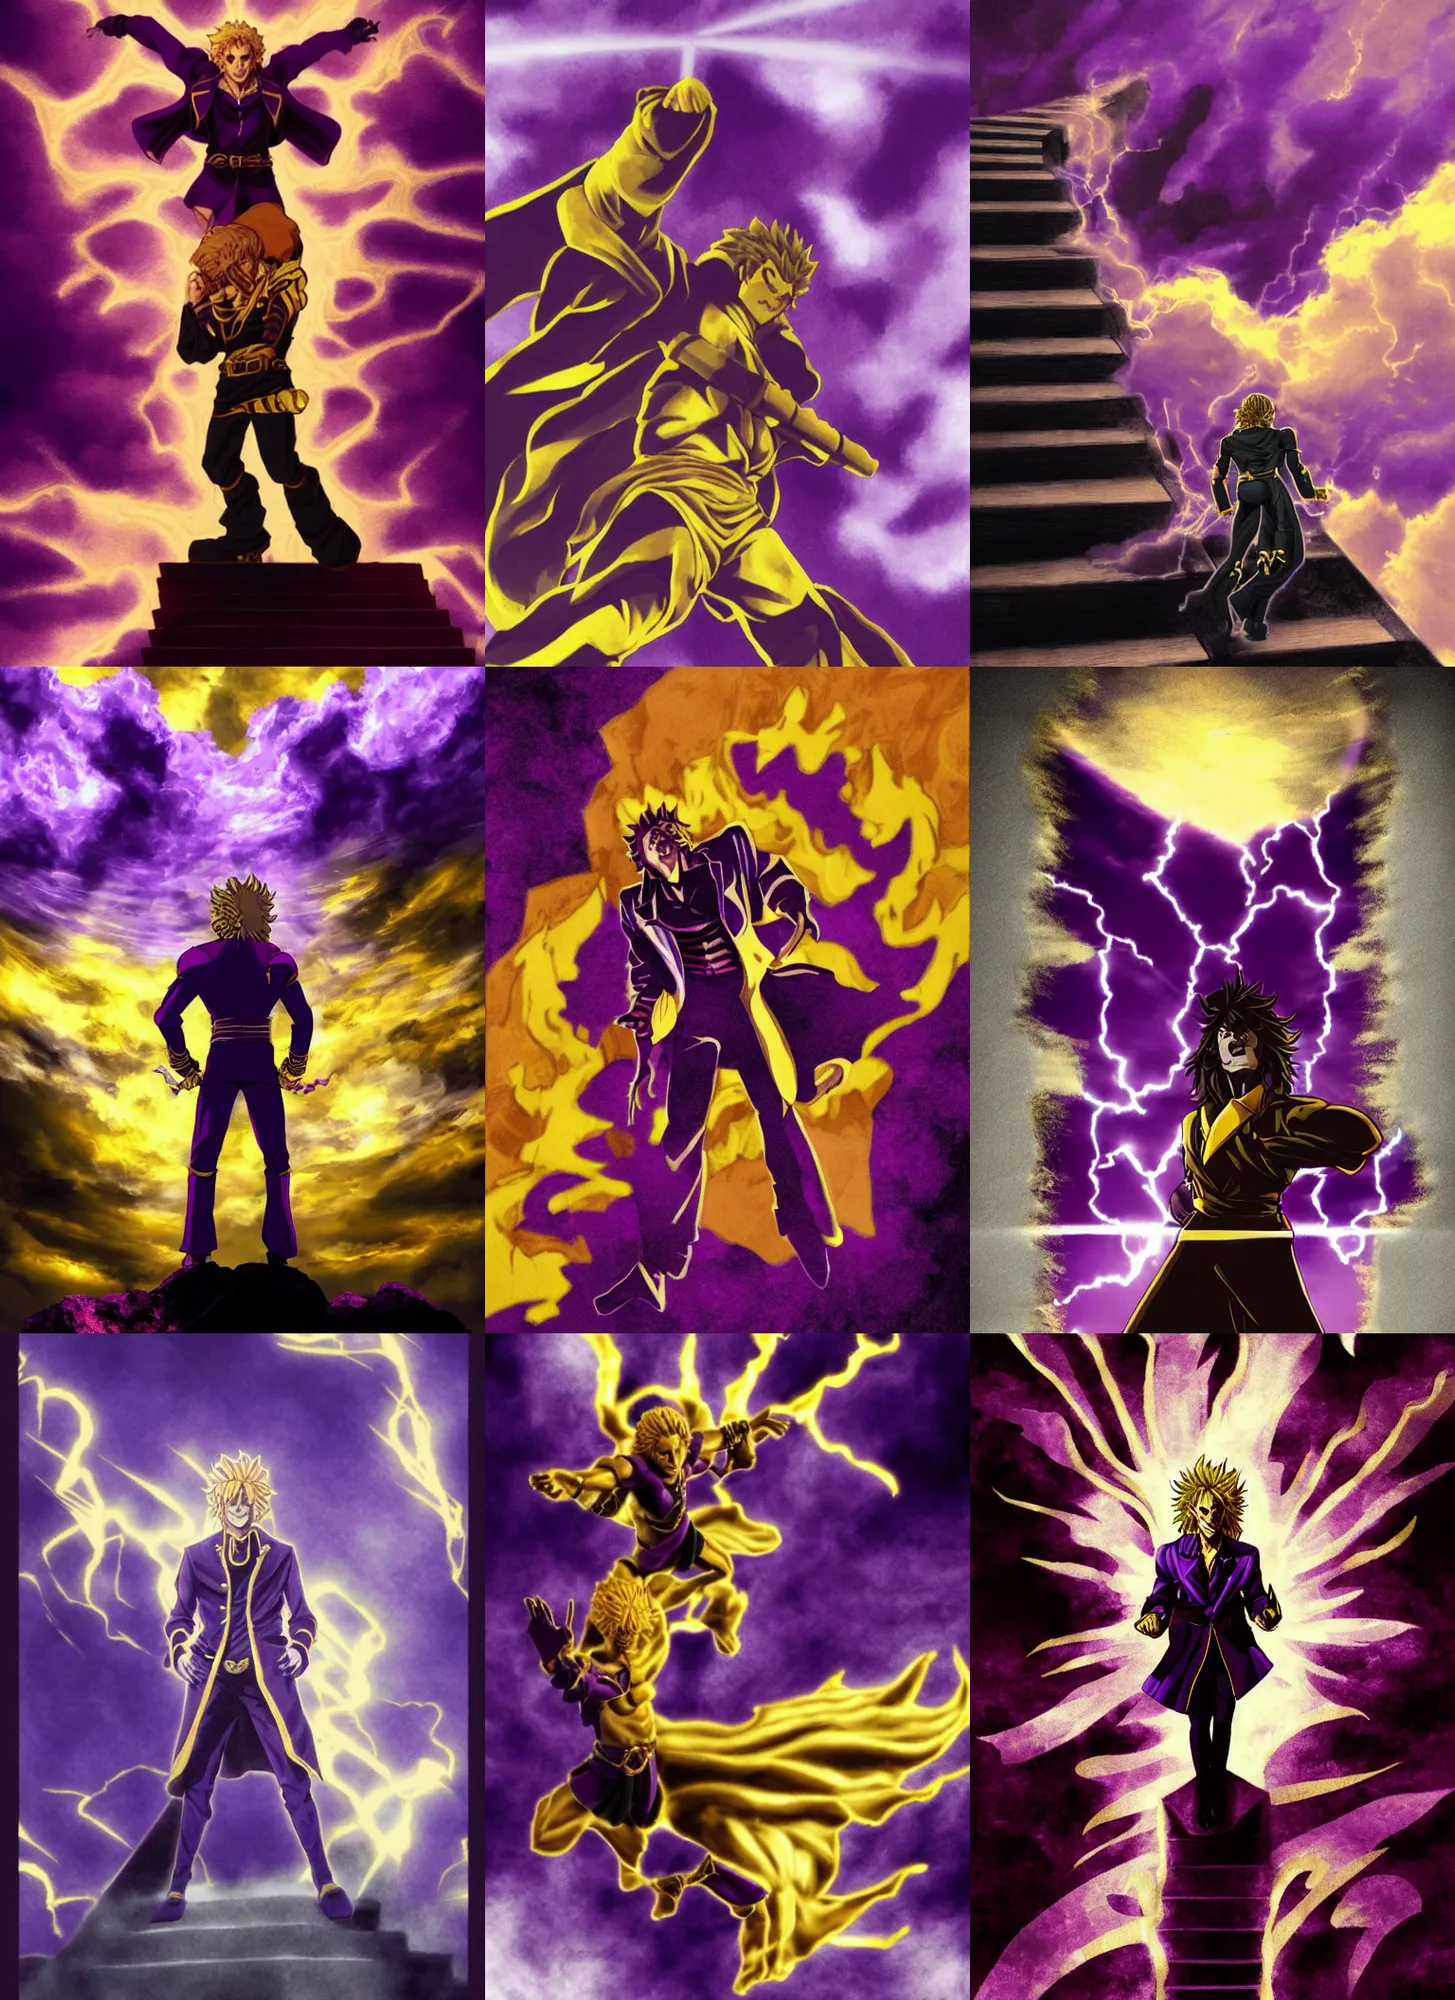 Prompt: DIO fron Jojo standing menacingly atop a flight of stairs, dramatic rim lighting, highly detailed, sharp, smoke, vignette effect, purple and gold color scheme